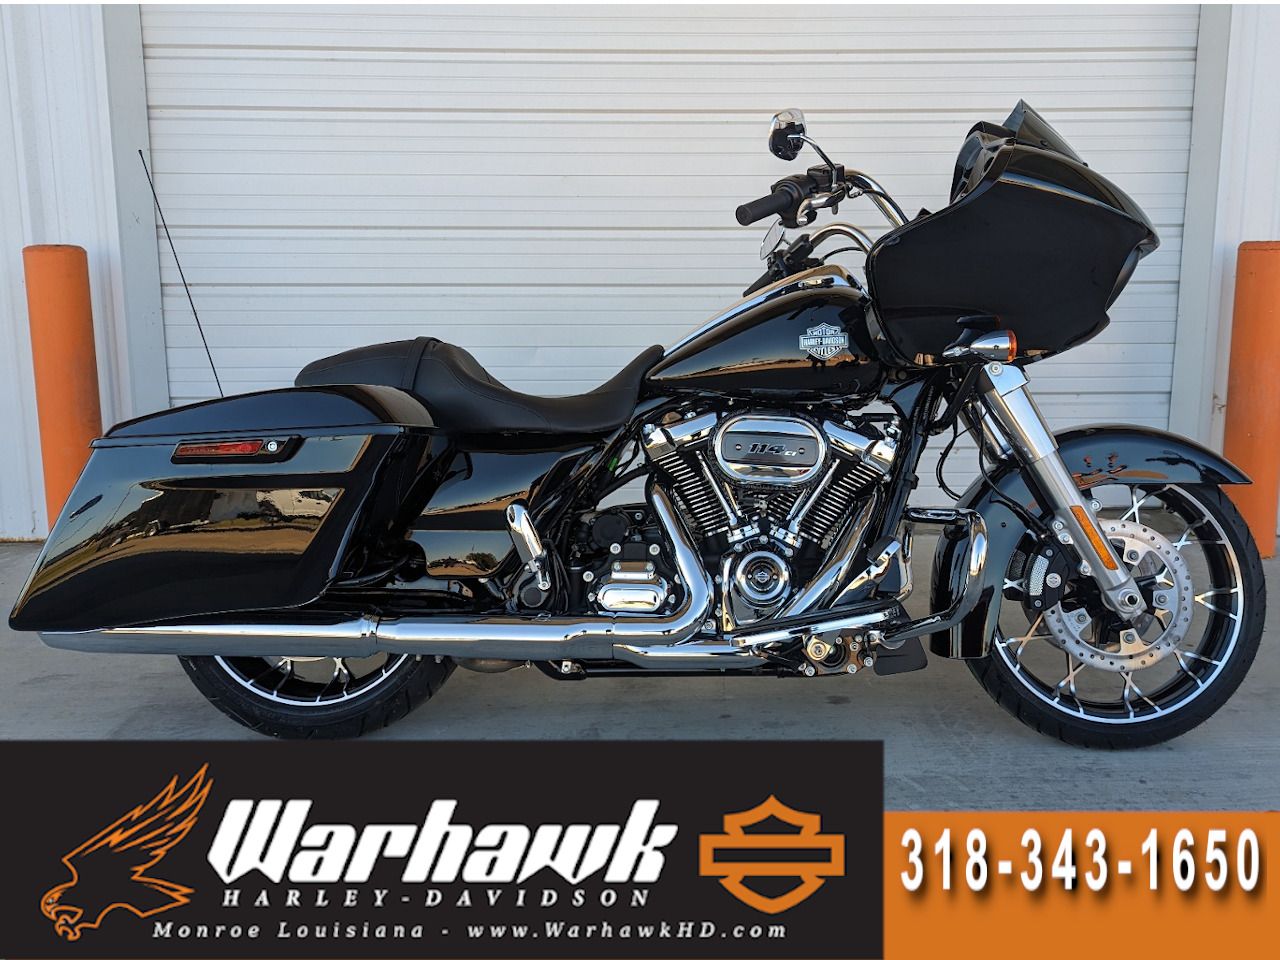 new 2022 harley road glide special black and chrome - Photo 1